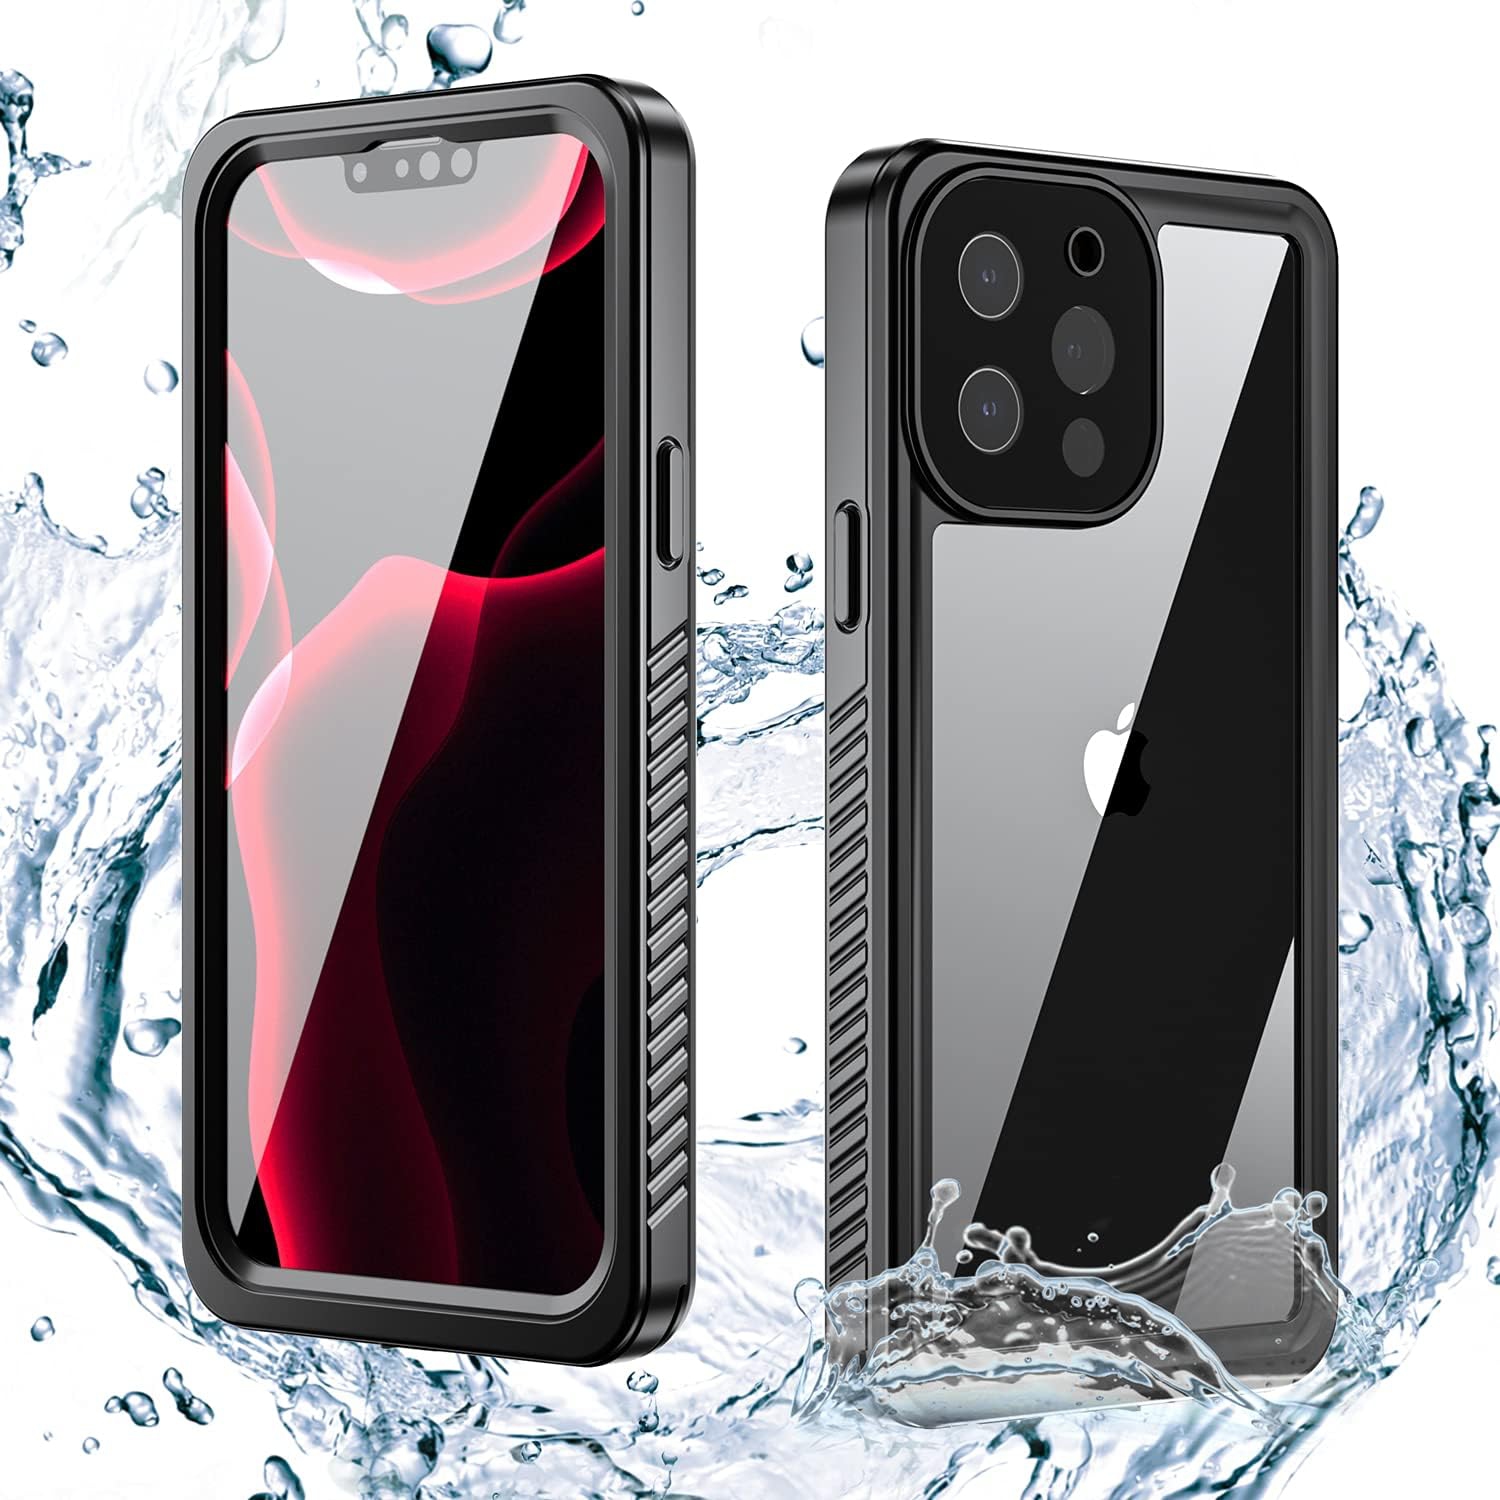 Waterproof Case for iPhone 13 Pro Max,DINGXIN Shockproof Dirt-Proof Snow-Proof Cover Full-Body Protective